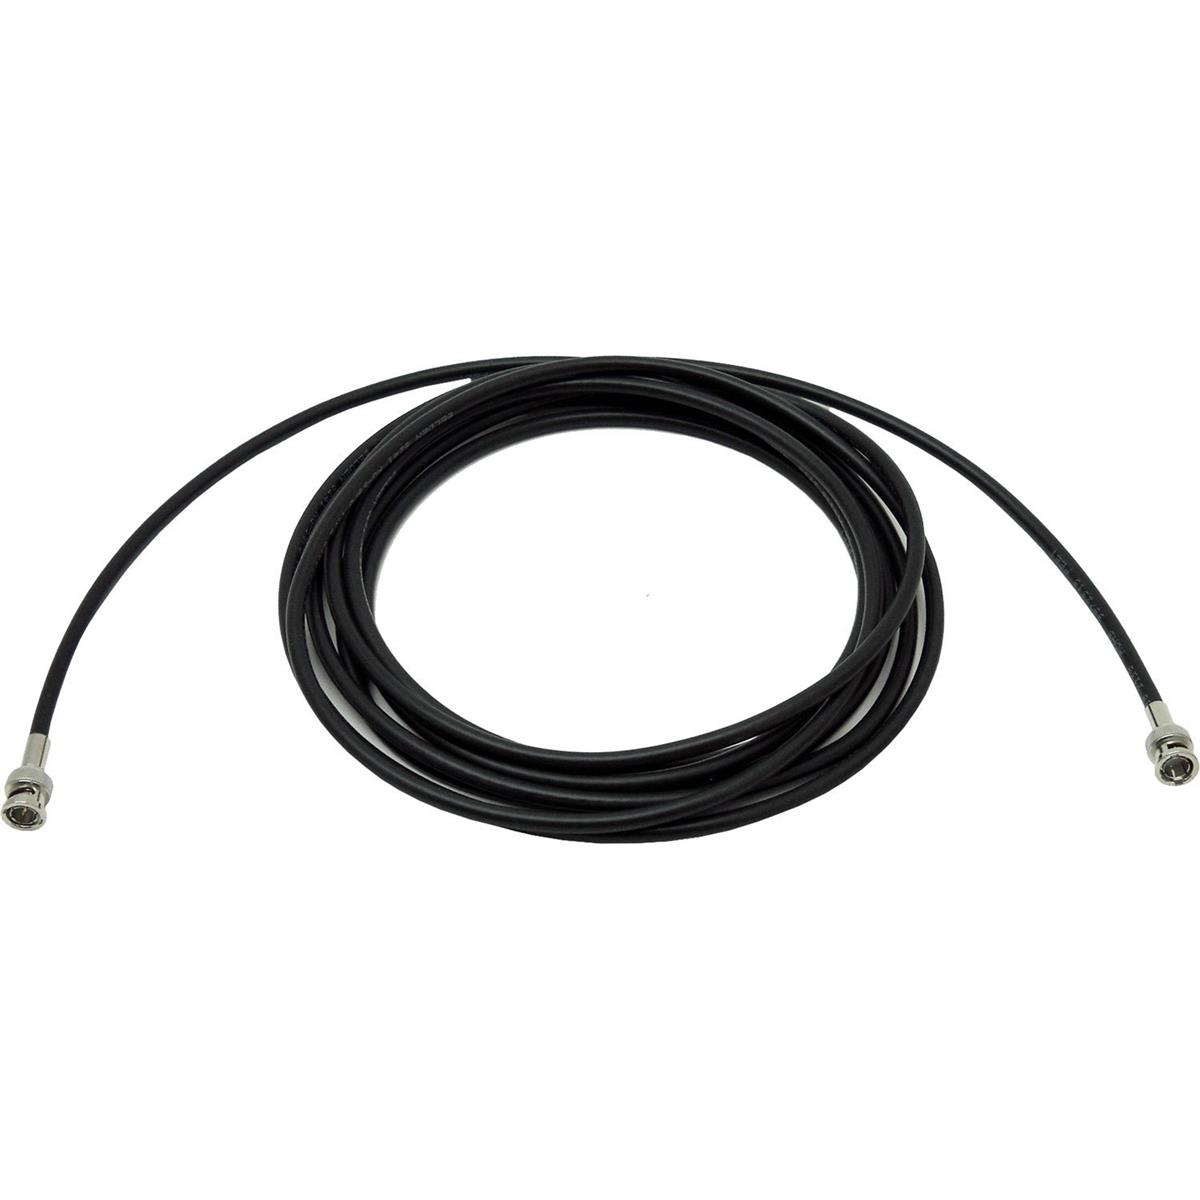 Image of PSC 15' RG59 BNC to BNC Coaxial Cable